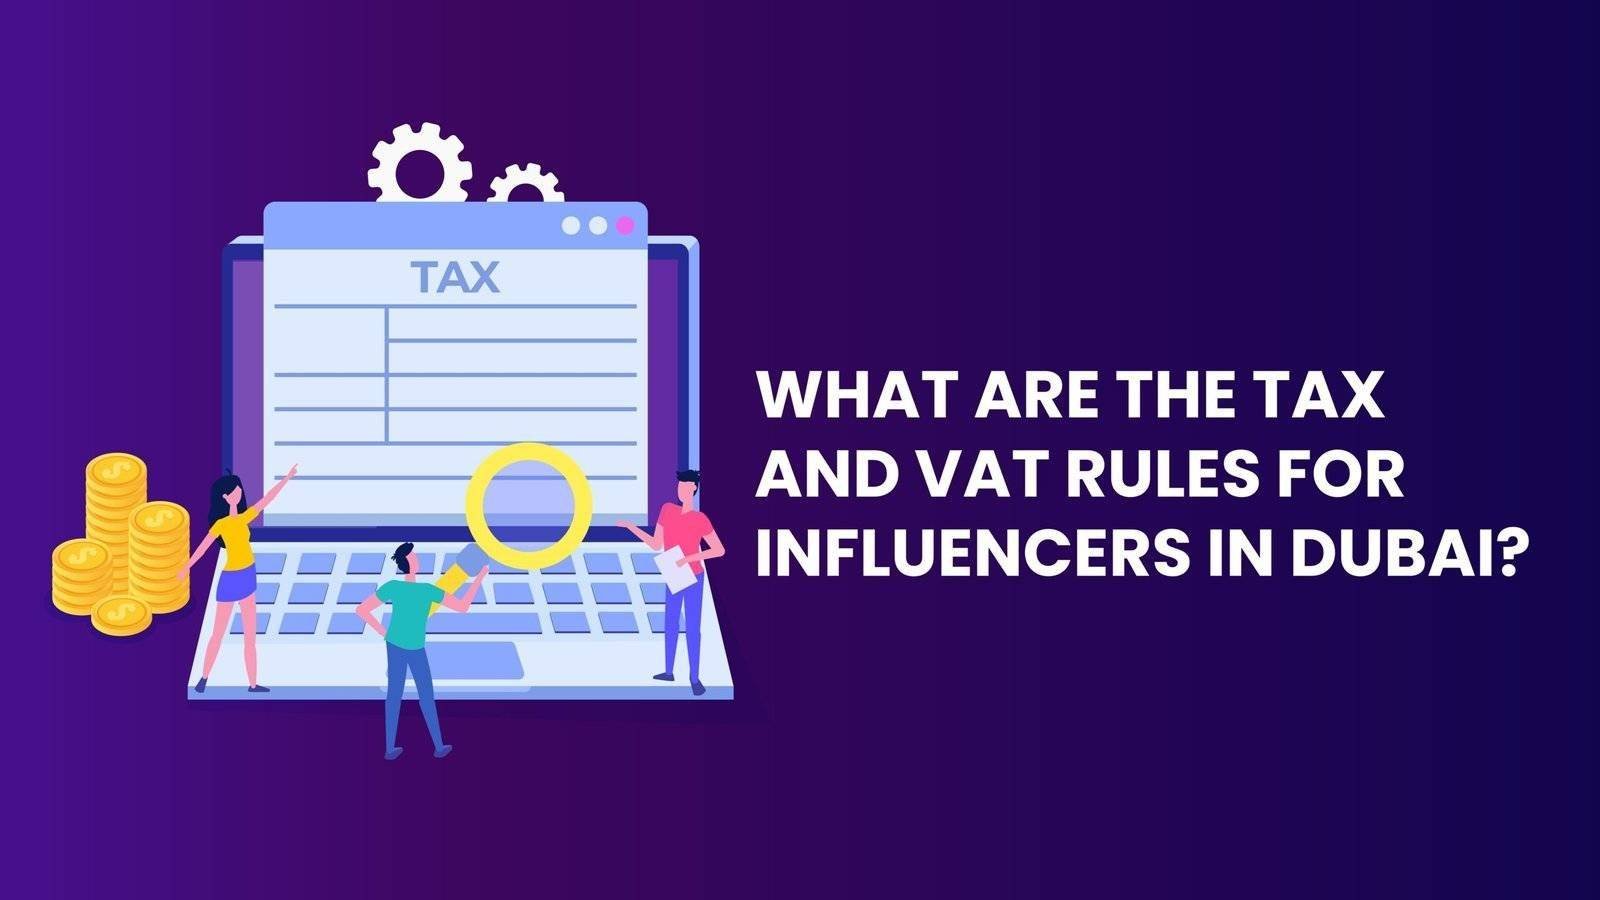 What are the Tax and VAT rules for influencers in Dubai?